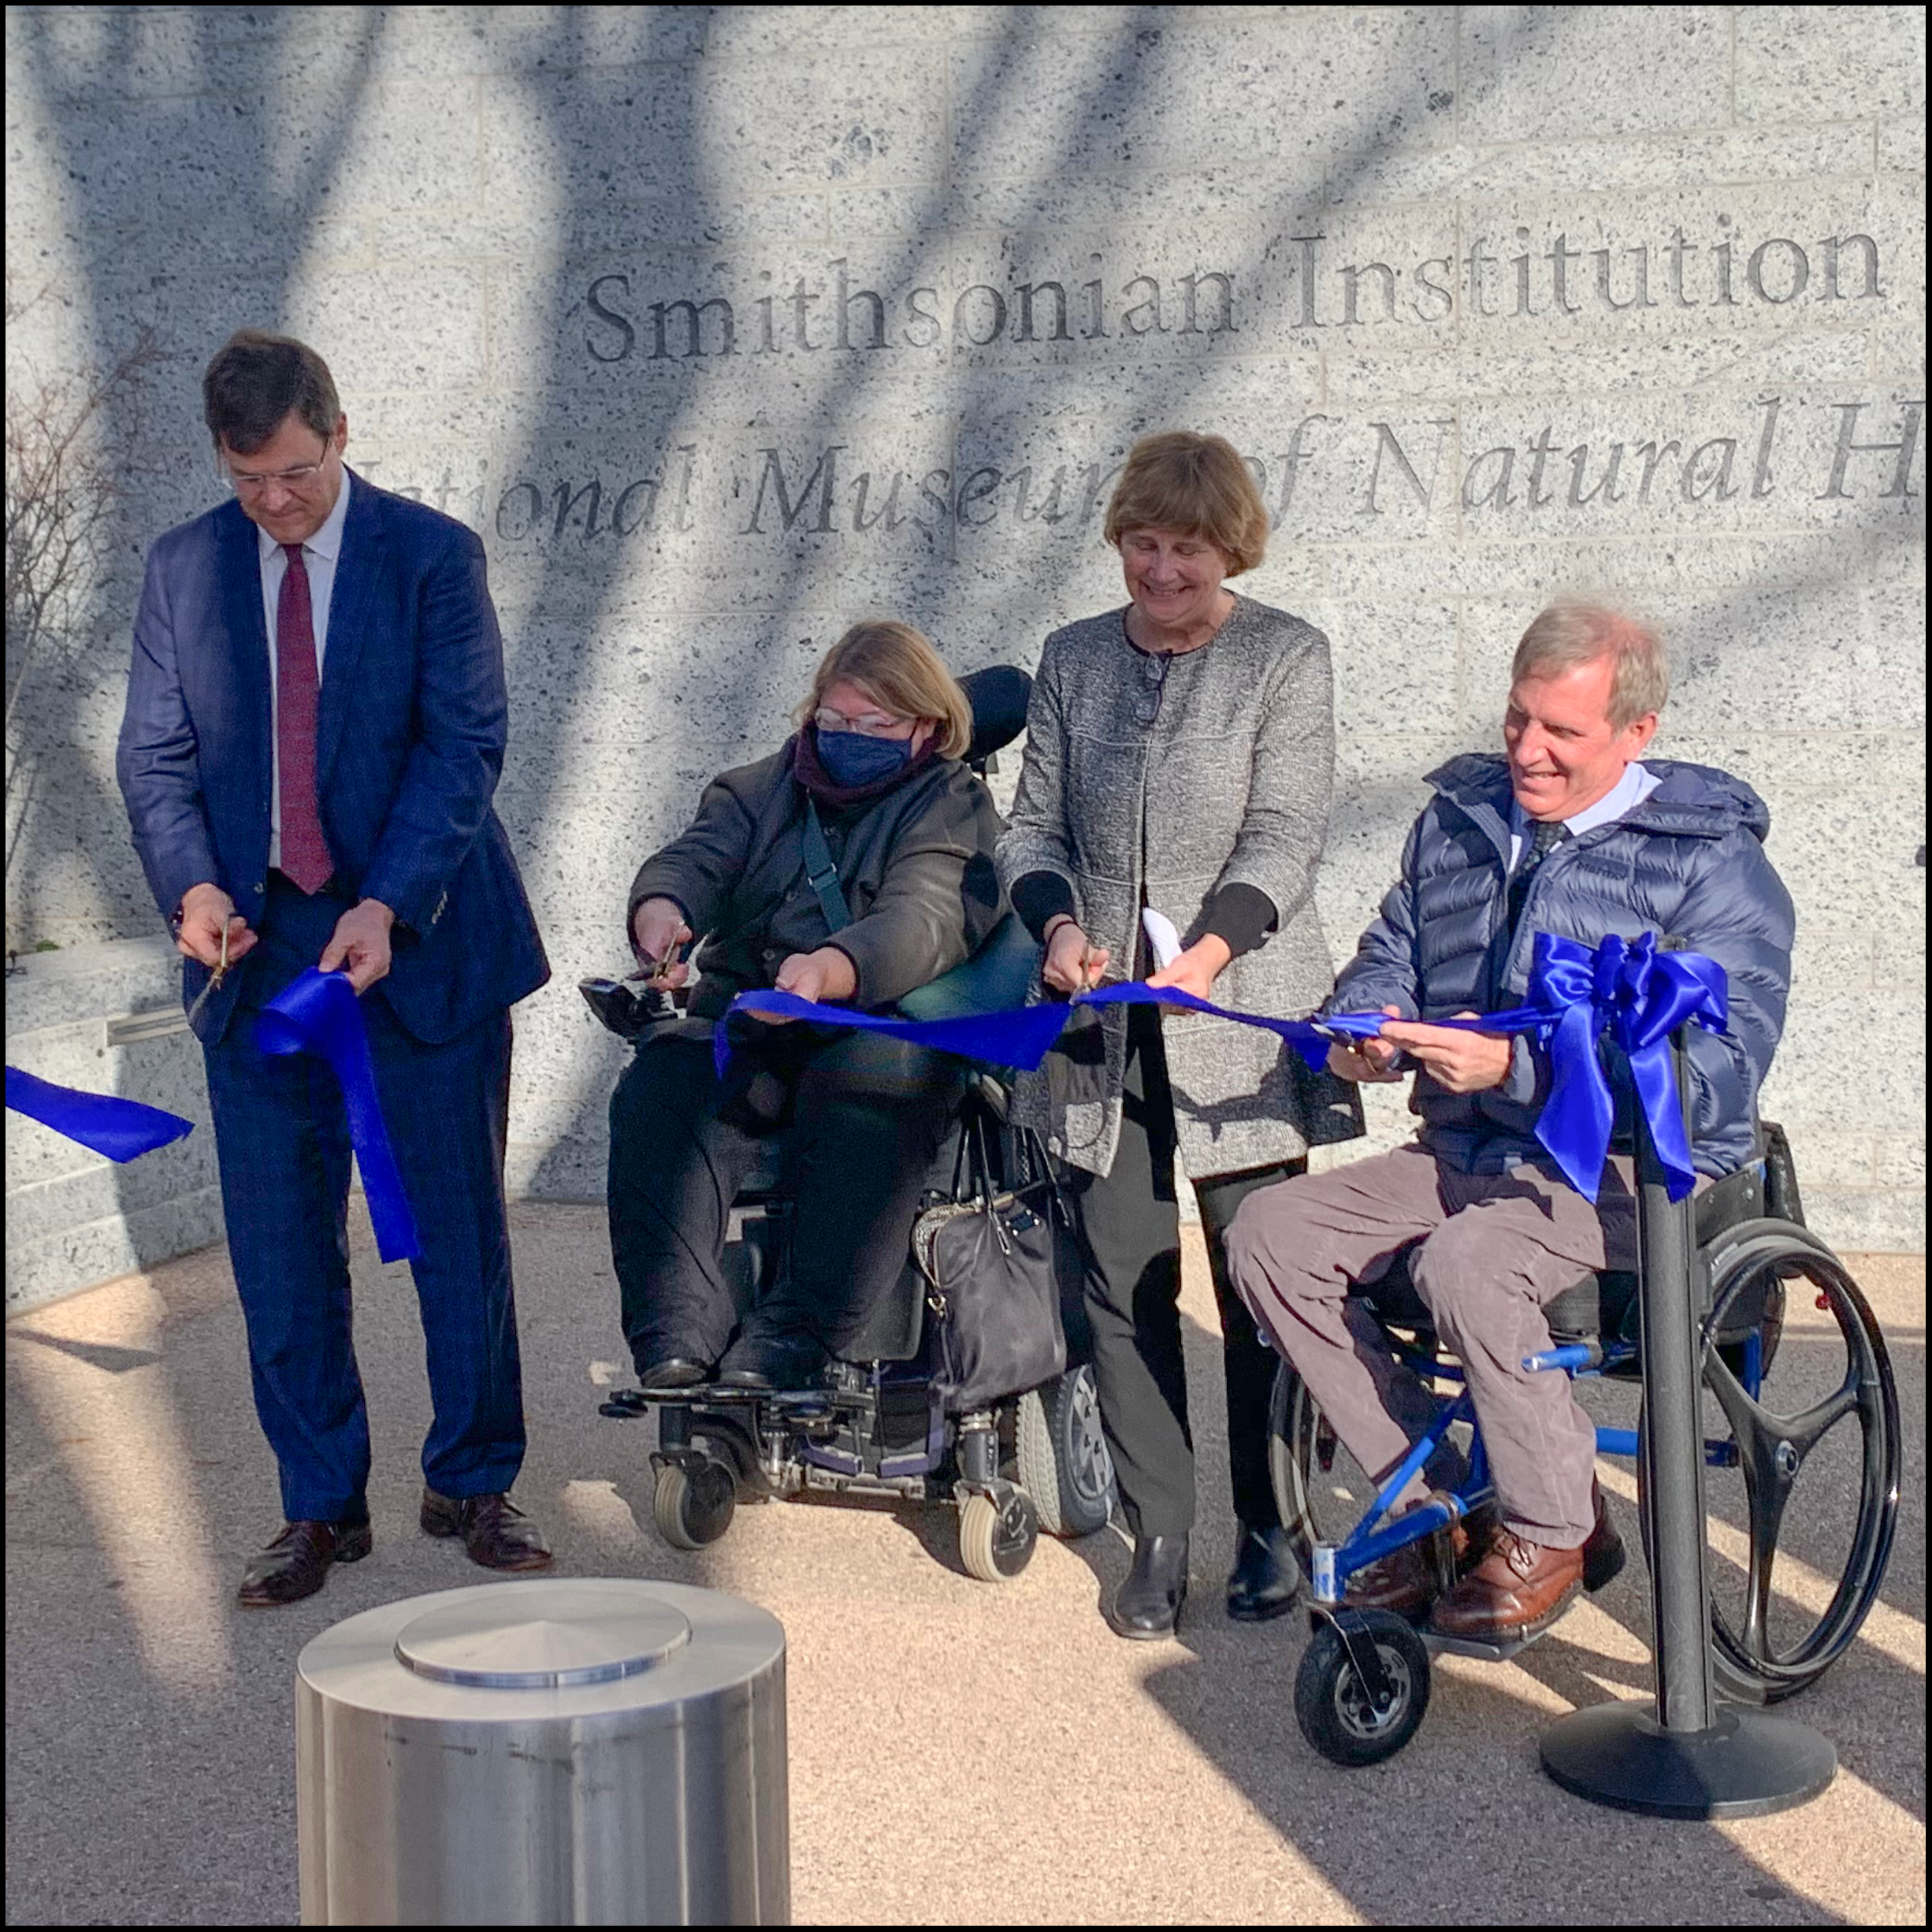 Photo of four people outside holding blue ribbon and scissors, Smithsonian Instituion is engraved in stone behind them.